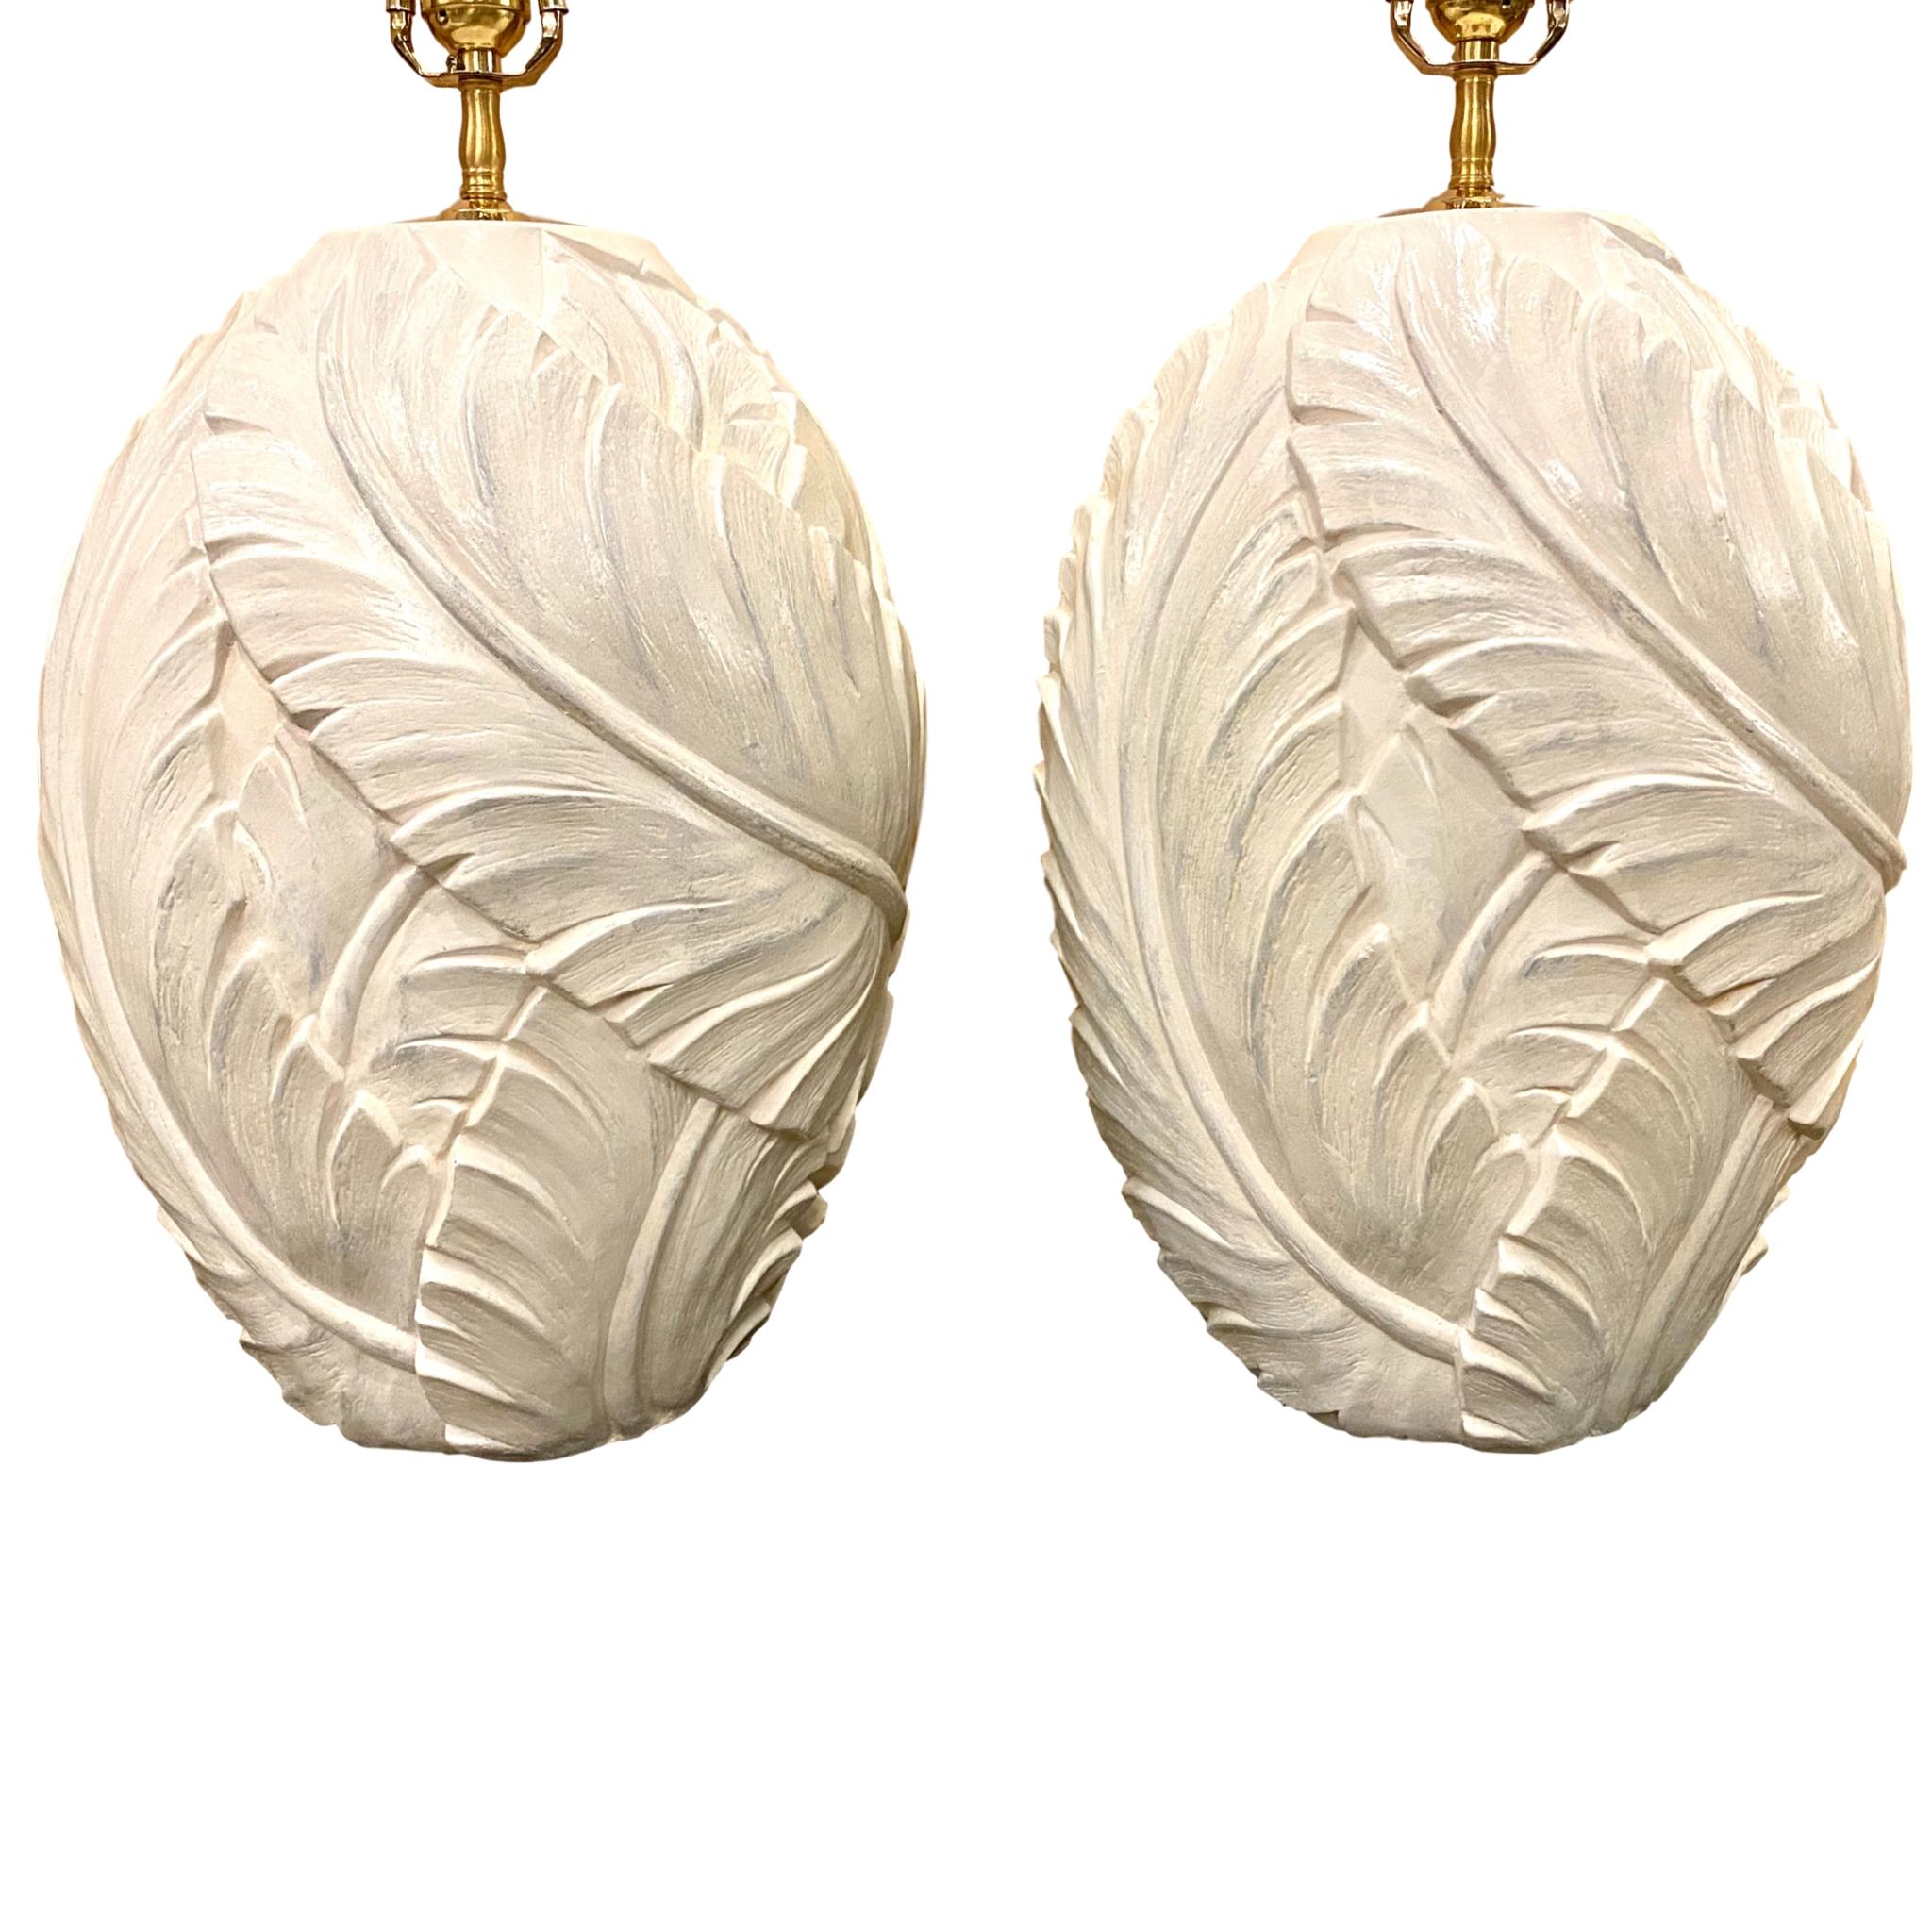 A pair of large circa 1960s French glazed plaster table lamps leaf motif in relief.

Measurements:
Height of body 17